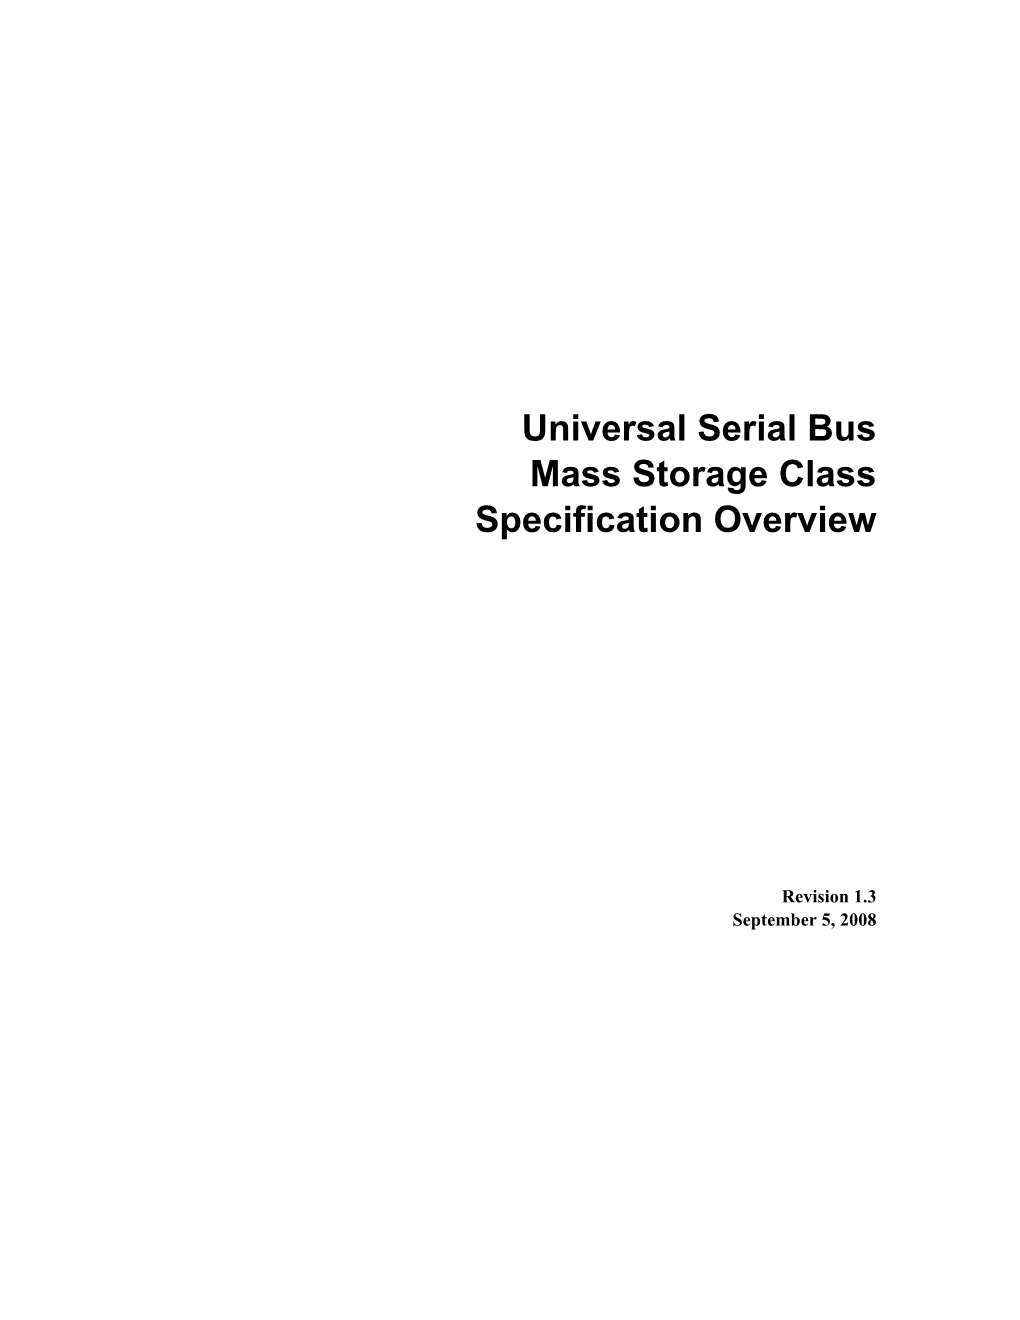 USB Mass Storage Class Specification Overview Page 2 of 9 Revision 1.3 September 5, 2008